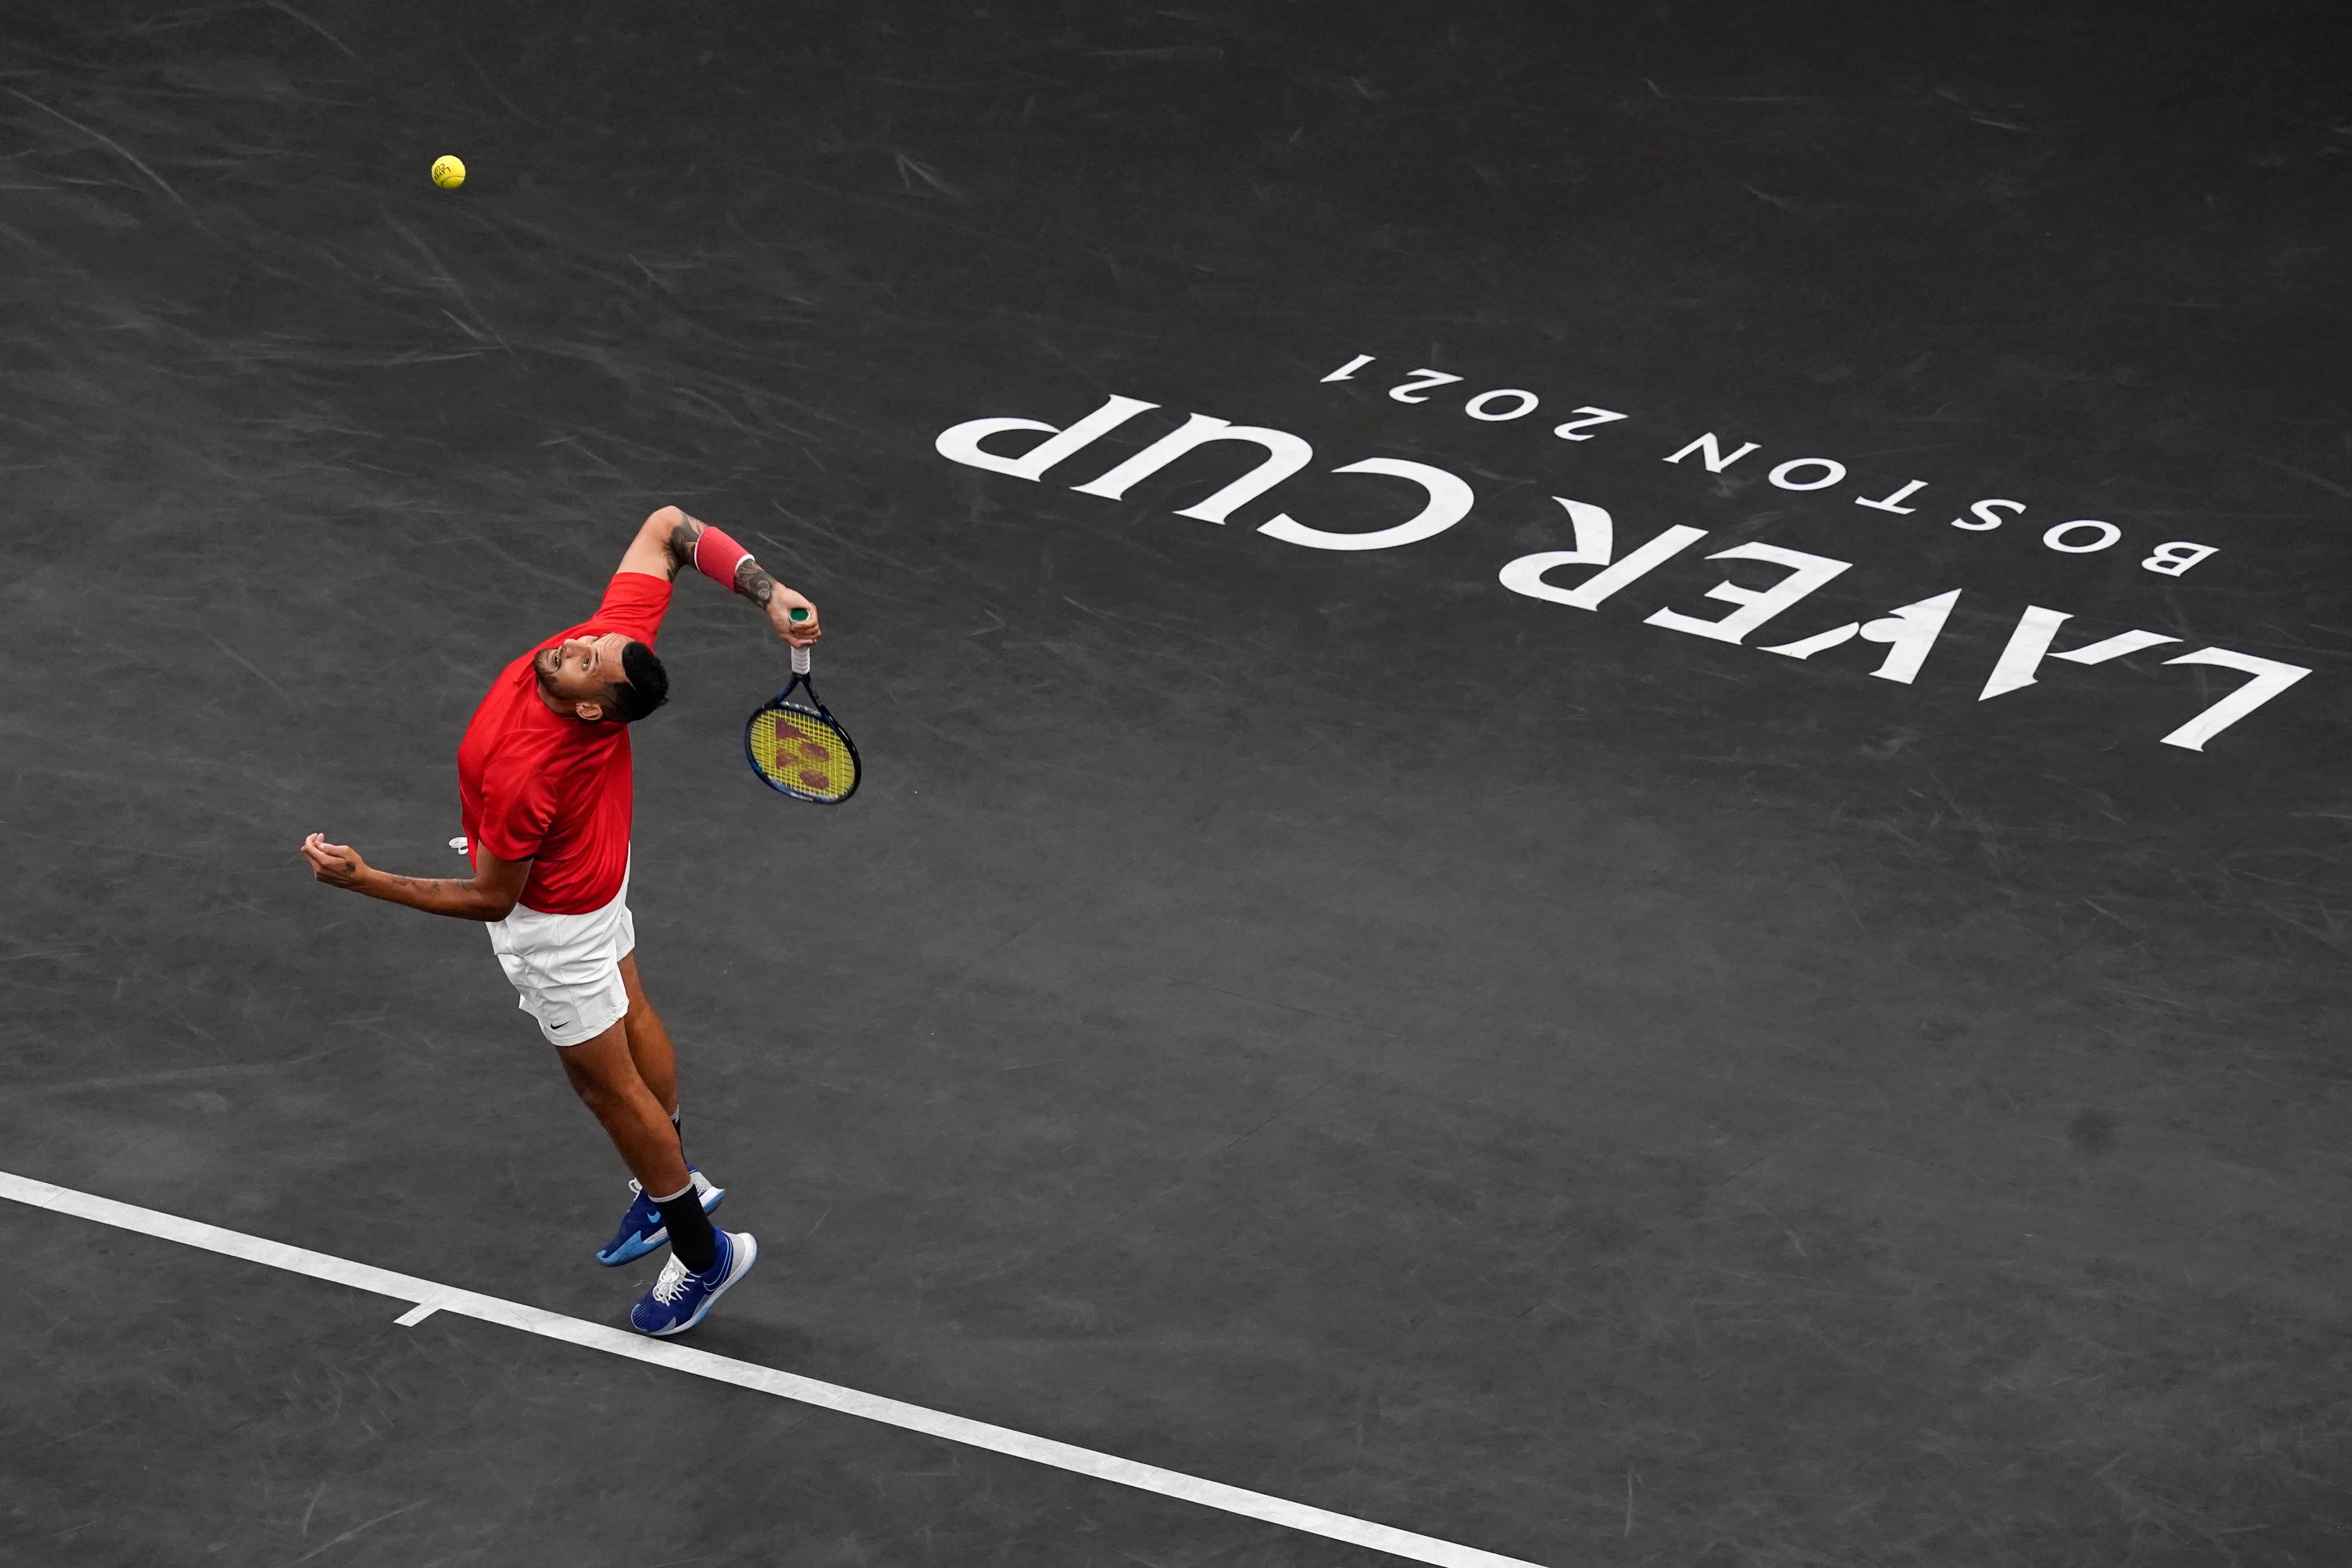 Nick Kyrgios hits a serve during the Laver Cup in Boston (Elise Amendola/AP)